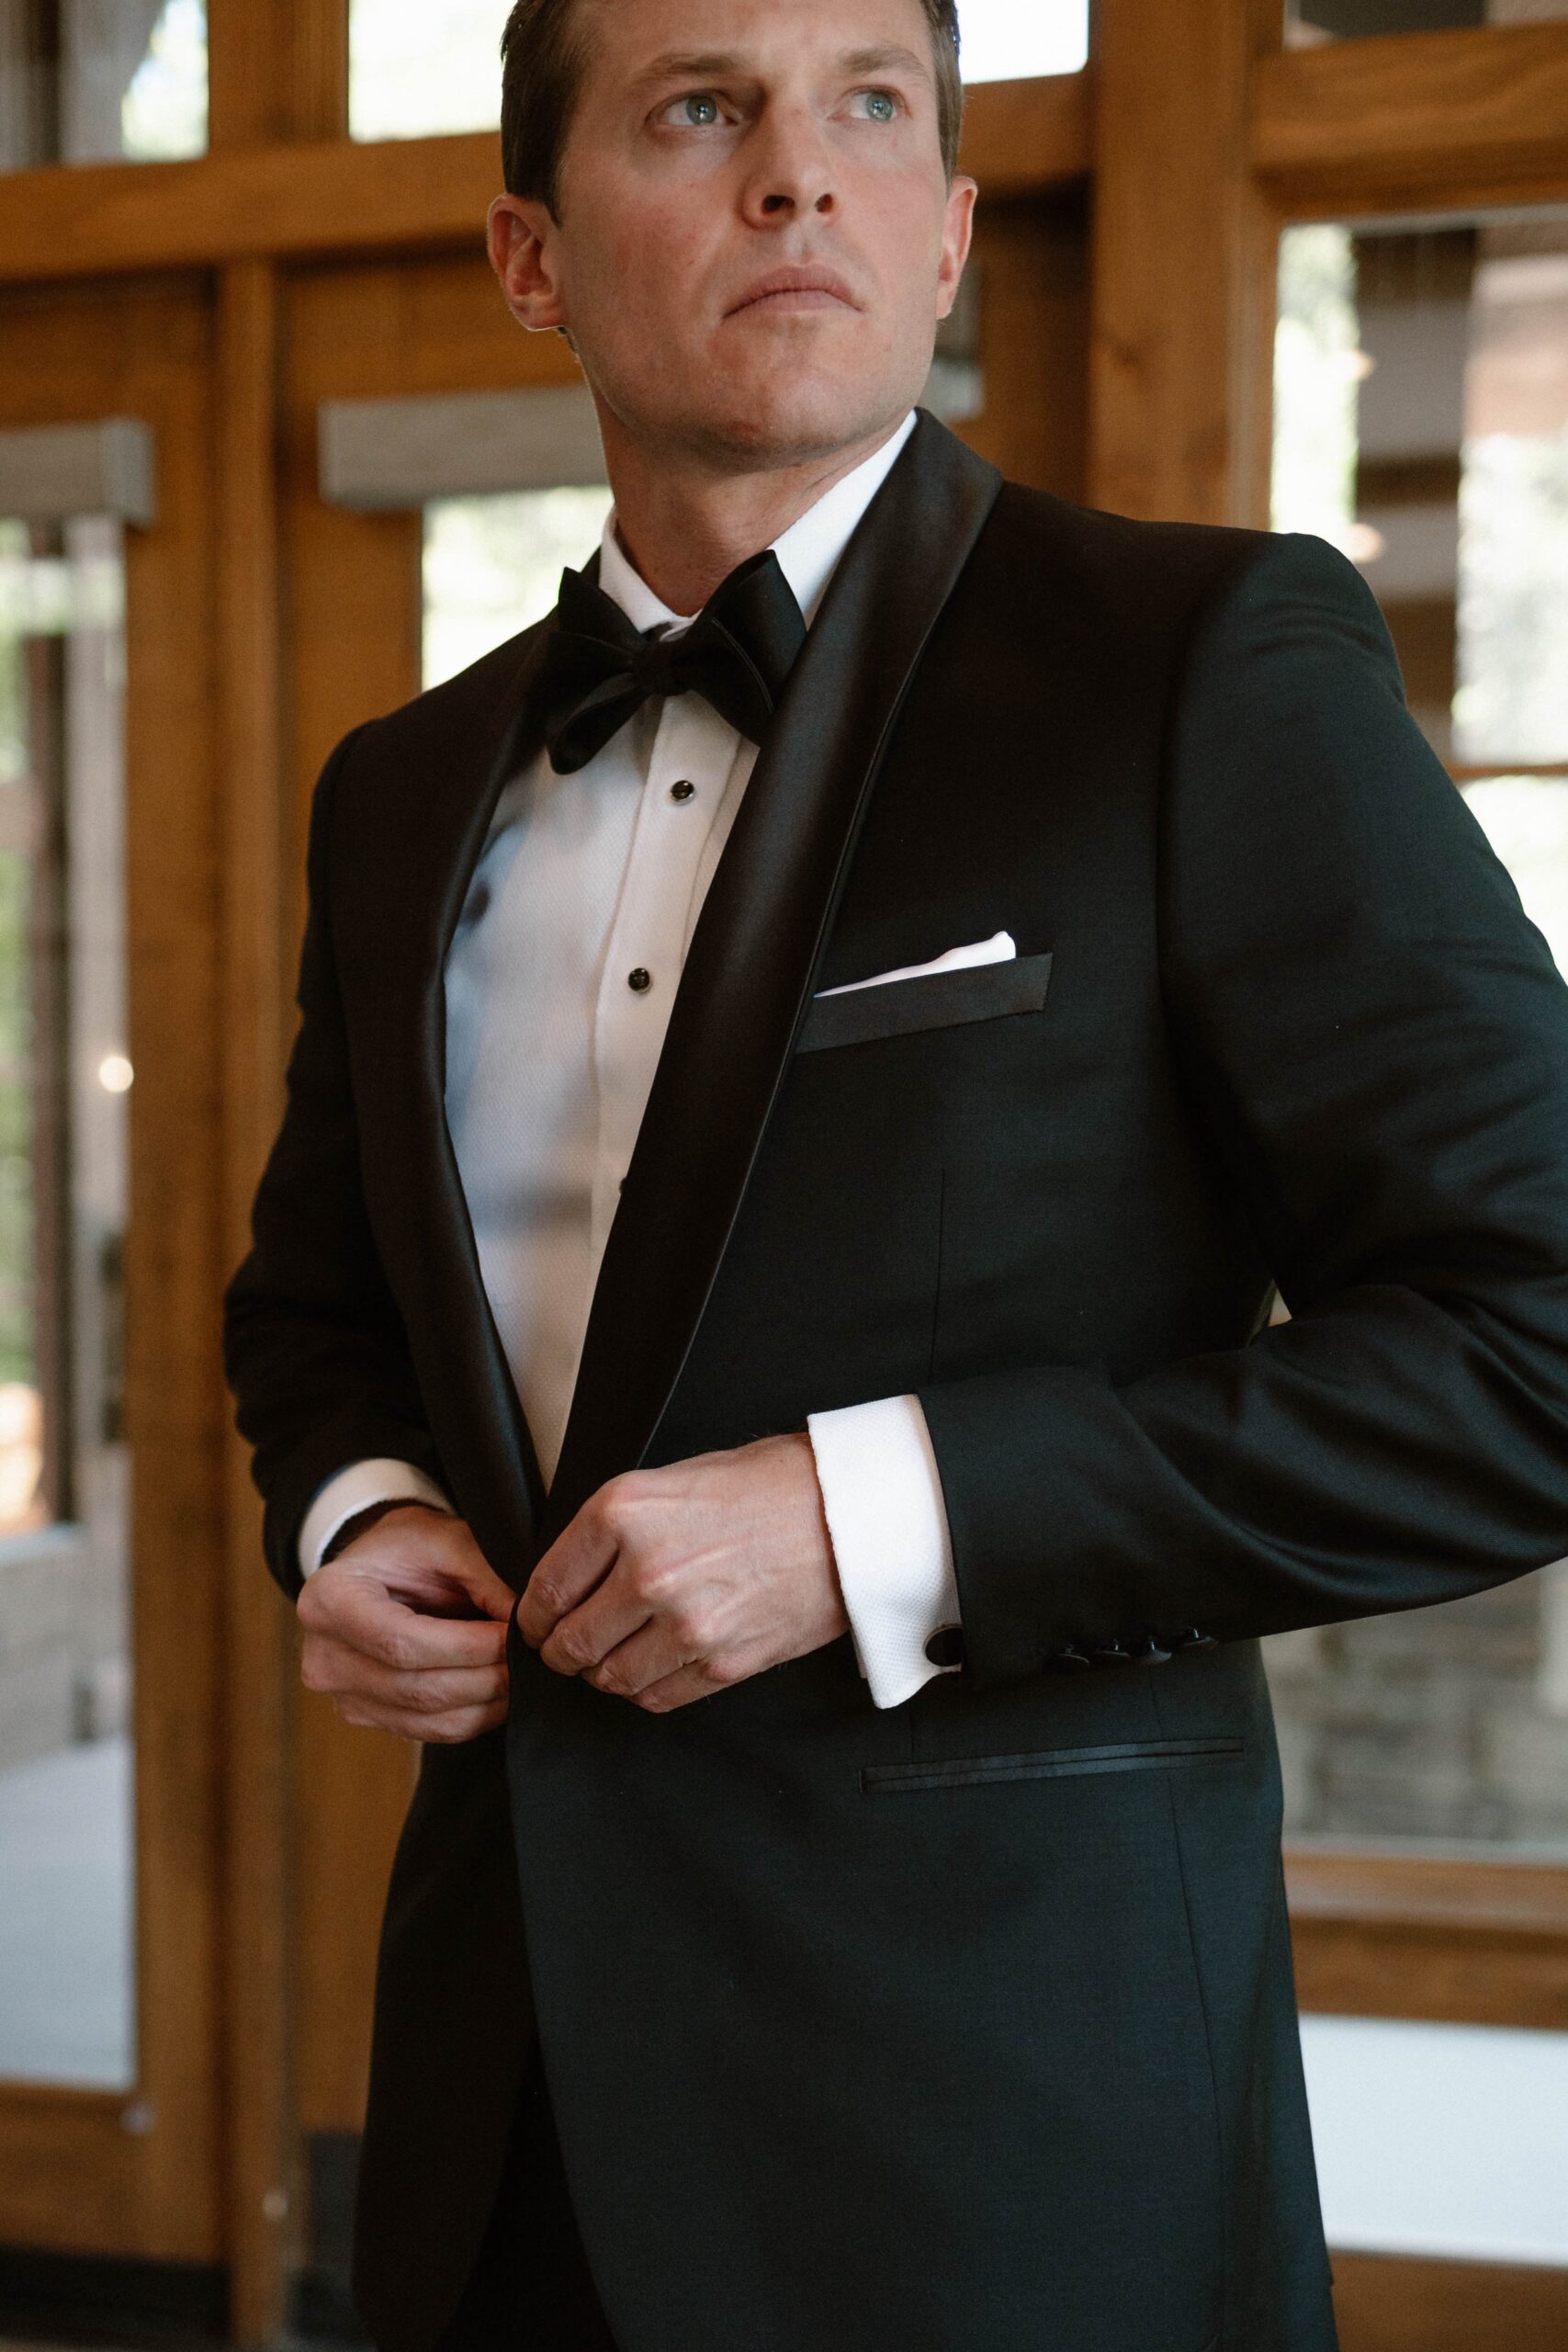 A groom getting ready for his wedding at Donovan Pavilion in Vail, Colorado. Photo by Colorado wedding photographer, Ashley Joyce.